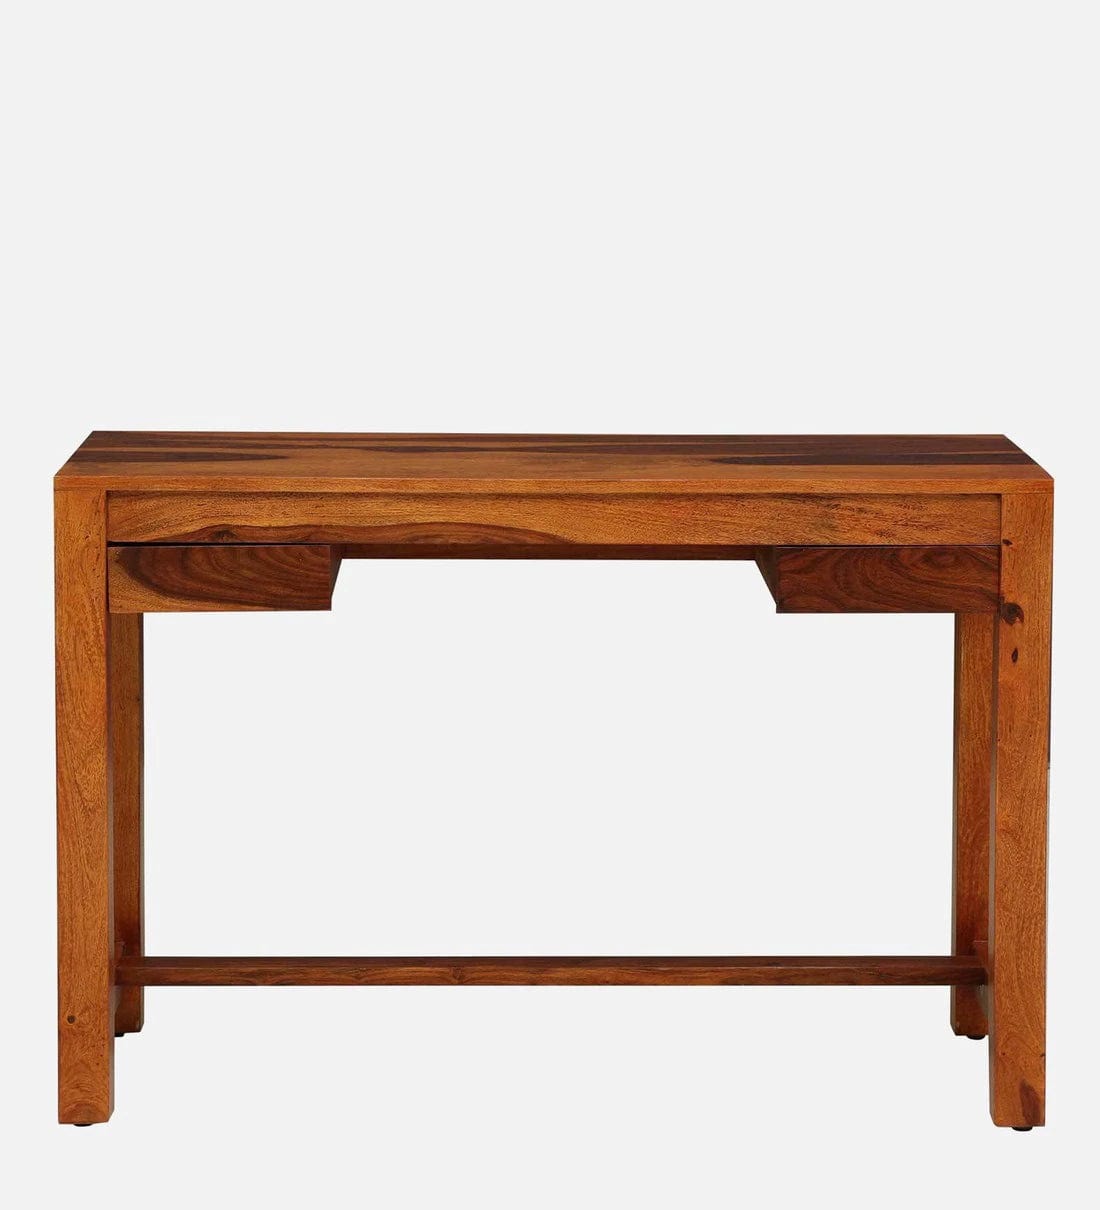 Claire Sheesham Wood Writing Table In Rustic Teak Finish,